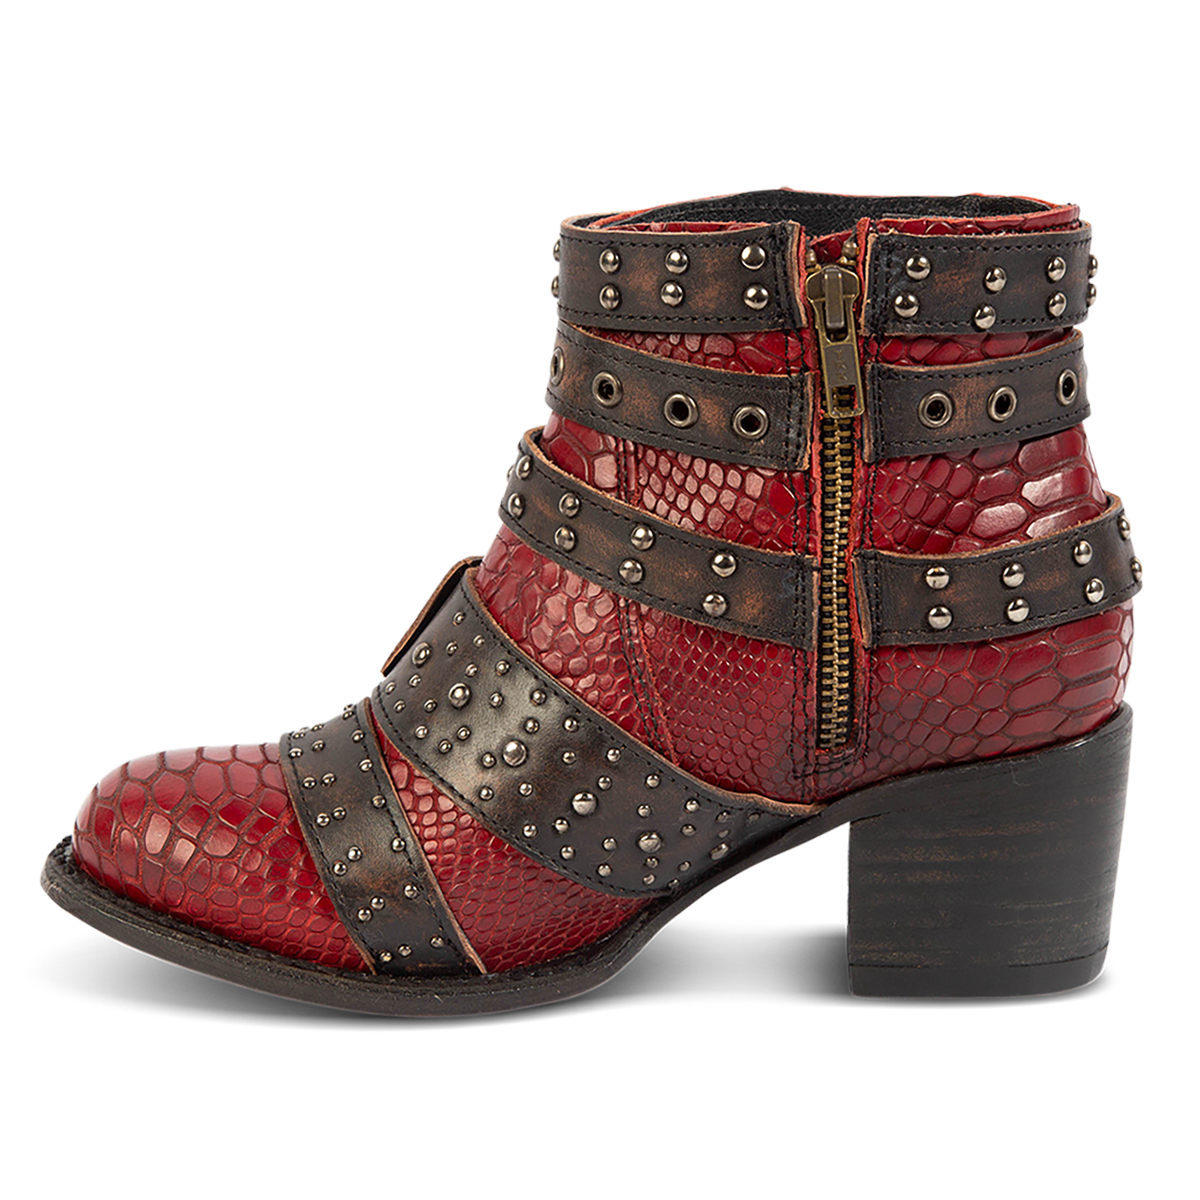 Inside view showing zip closure on FREEBIRD women's Slayer red multi leather ankle bootie